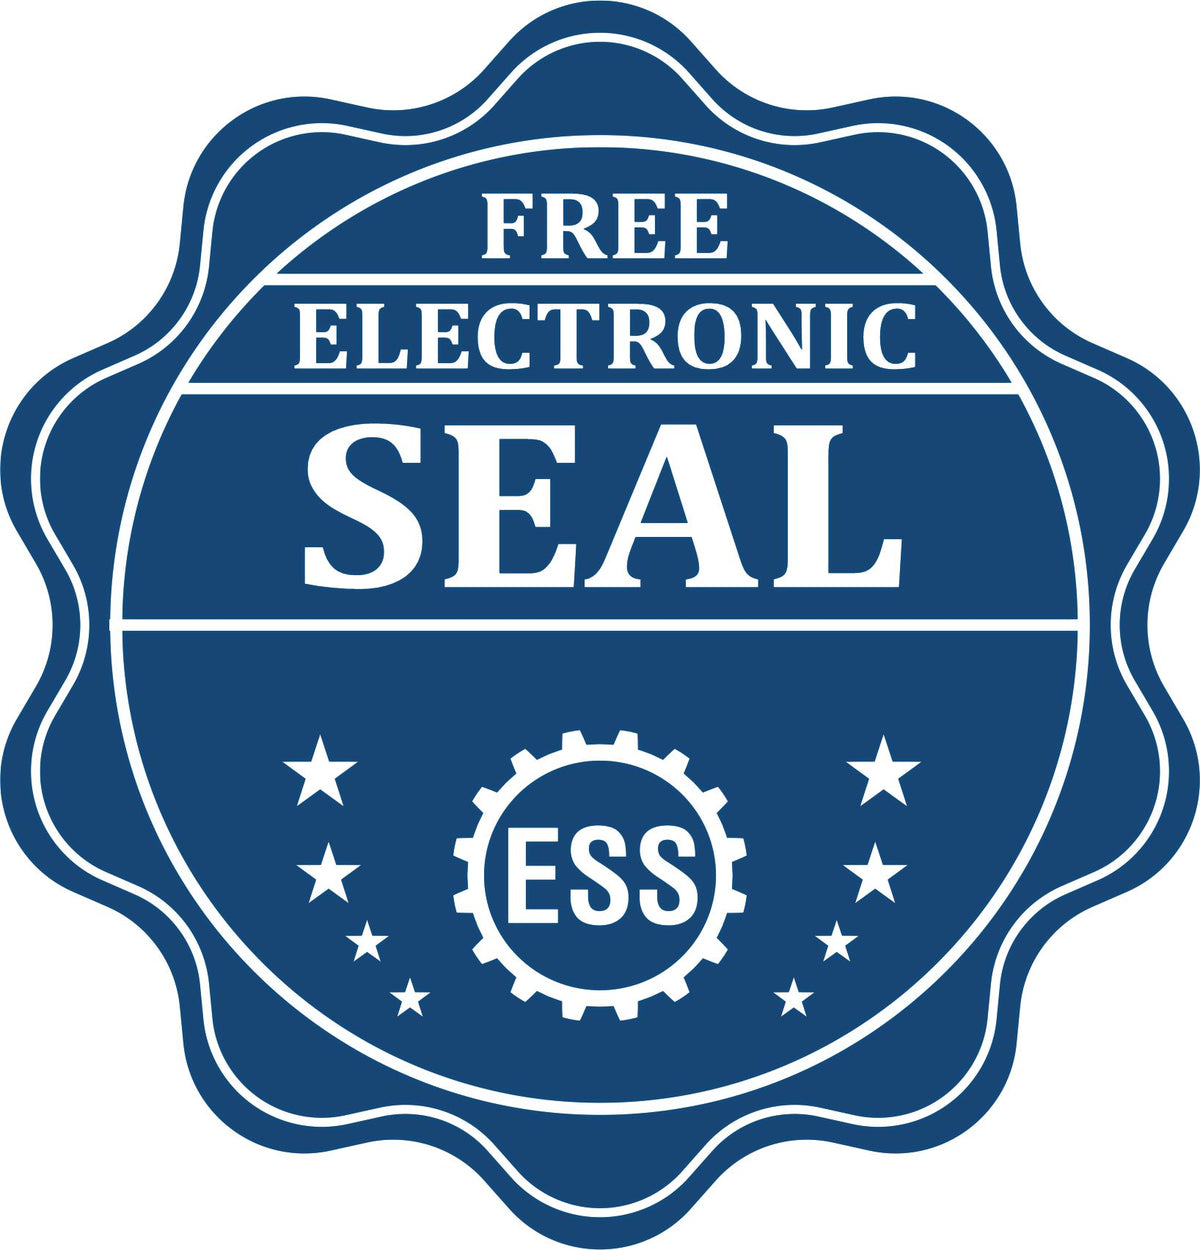 A badge showing a free electronic seal for the Handheld Georgia Professional Geologist Embosser with stars and the ESS gear on the emblem.